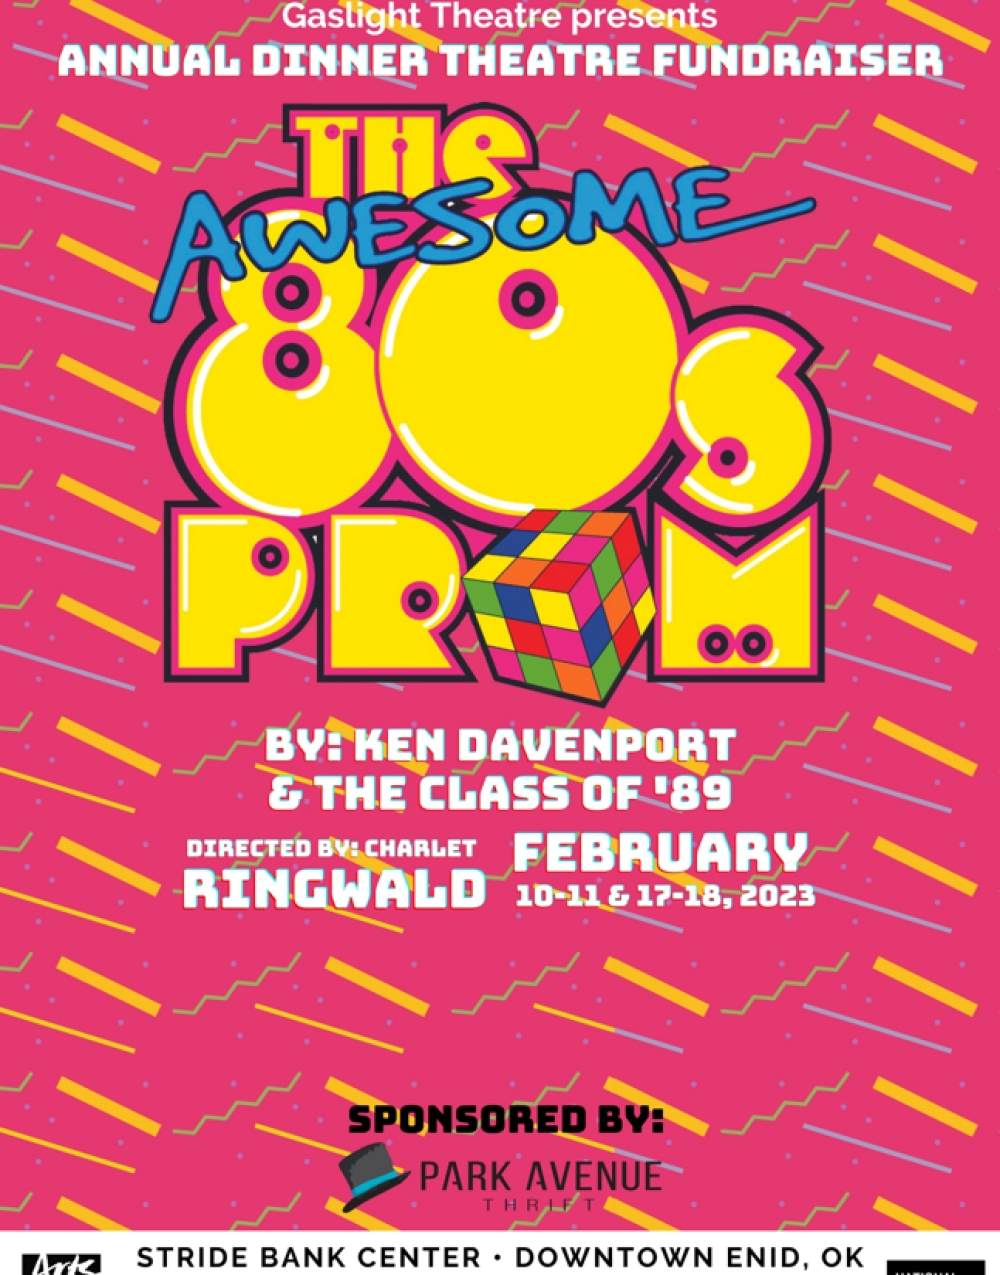 The Awesome 80s Prom - Gaslight Theatre Stage Mag